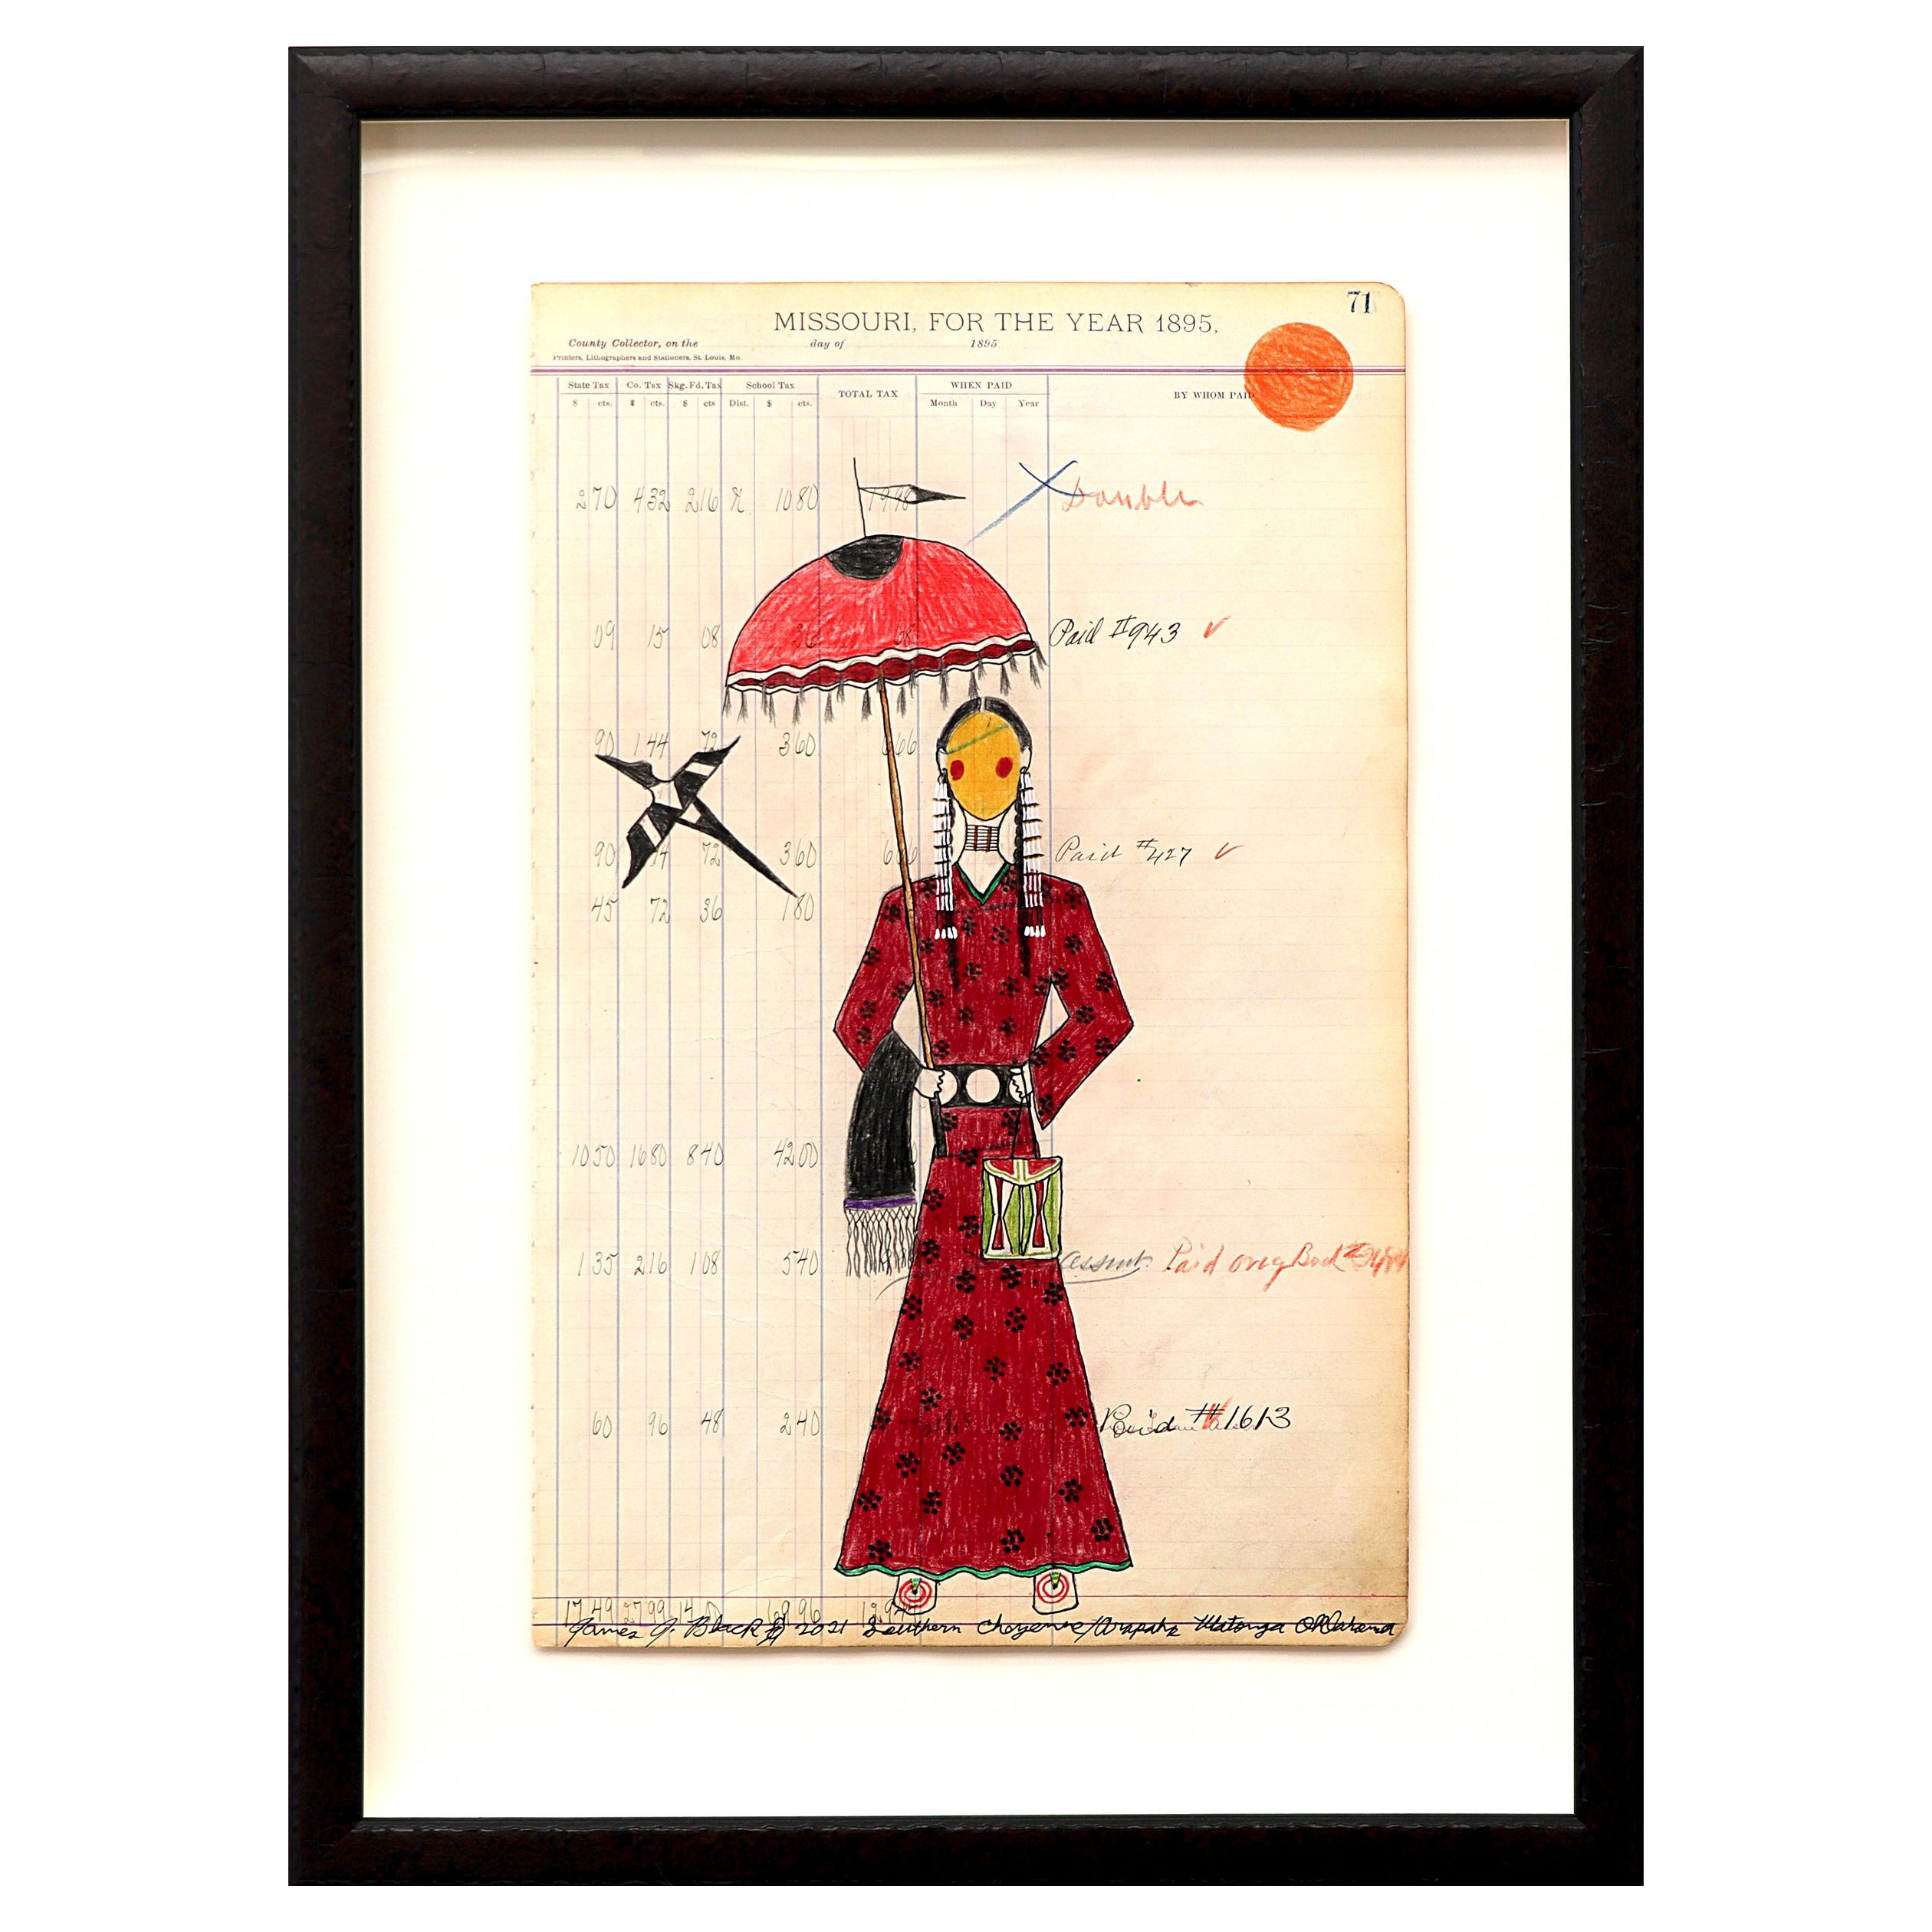 Untitled 'Cheyenne Woman with Parfleche and Umbrella', Ledger Art Drawing